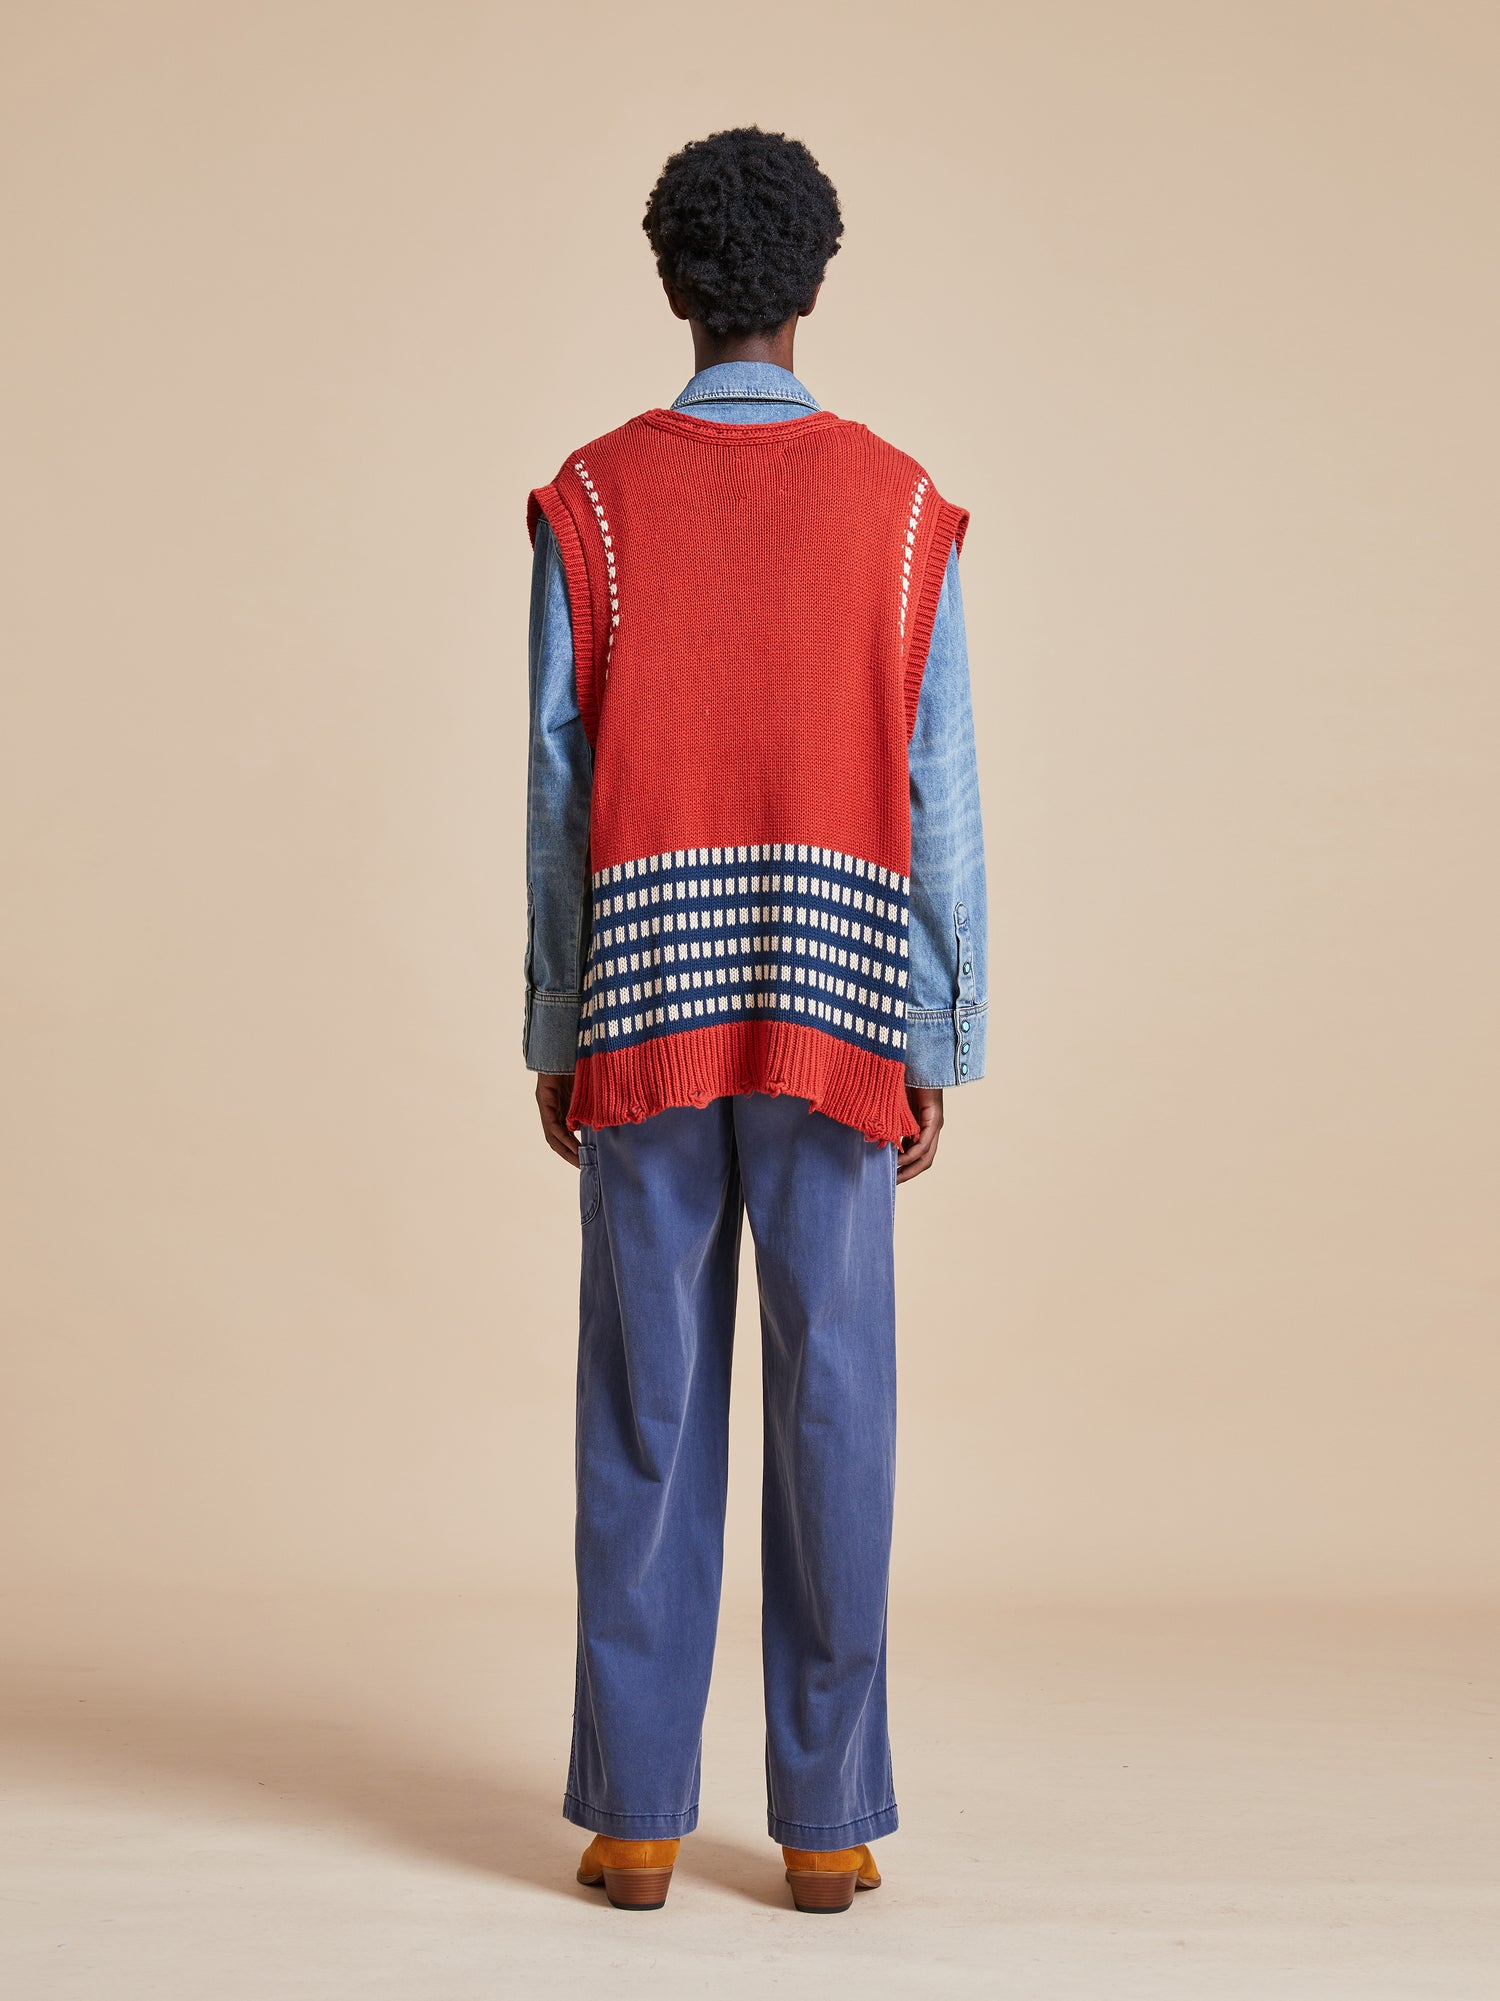 The back view of a man wearing a Found Homestead Check Sweater Knit Vest and blue pants.